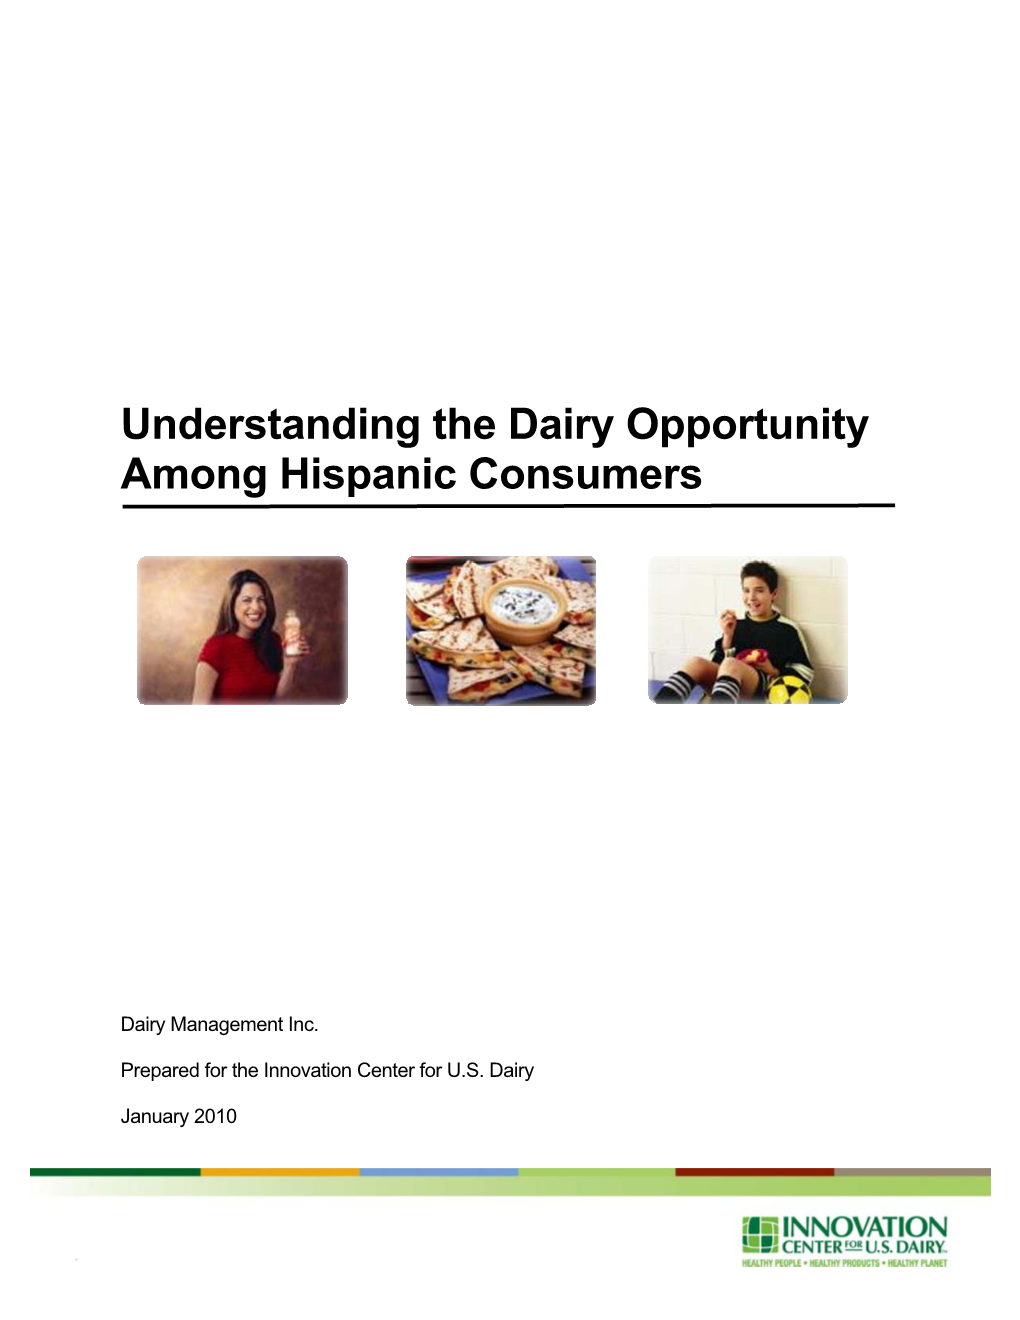 Understanding the Dairy Opportunity Among Hispanic Consumers